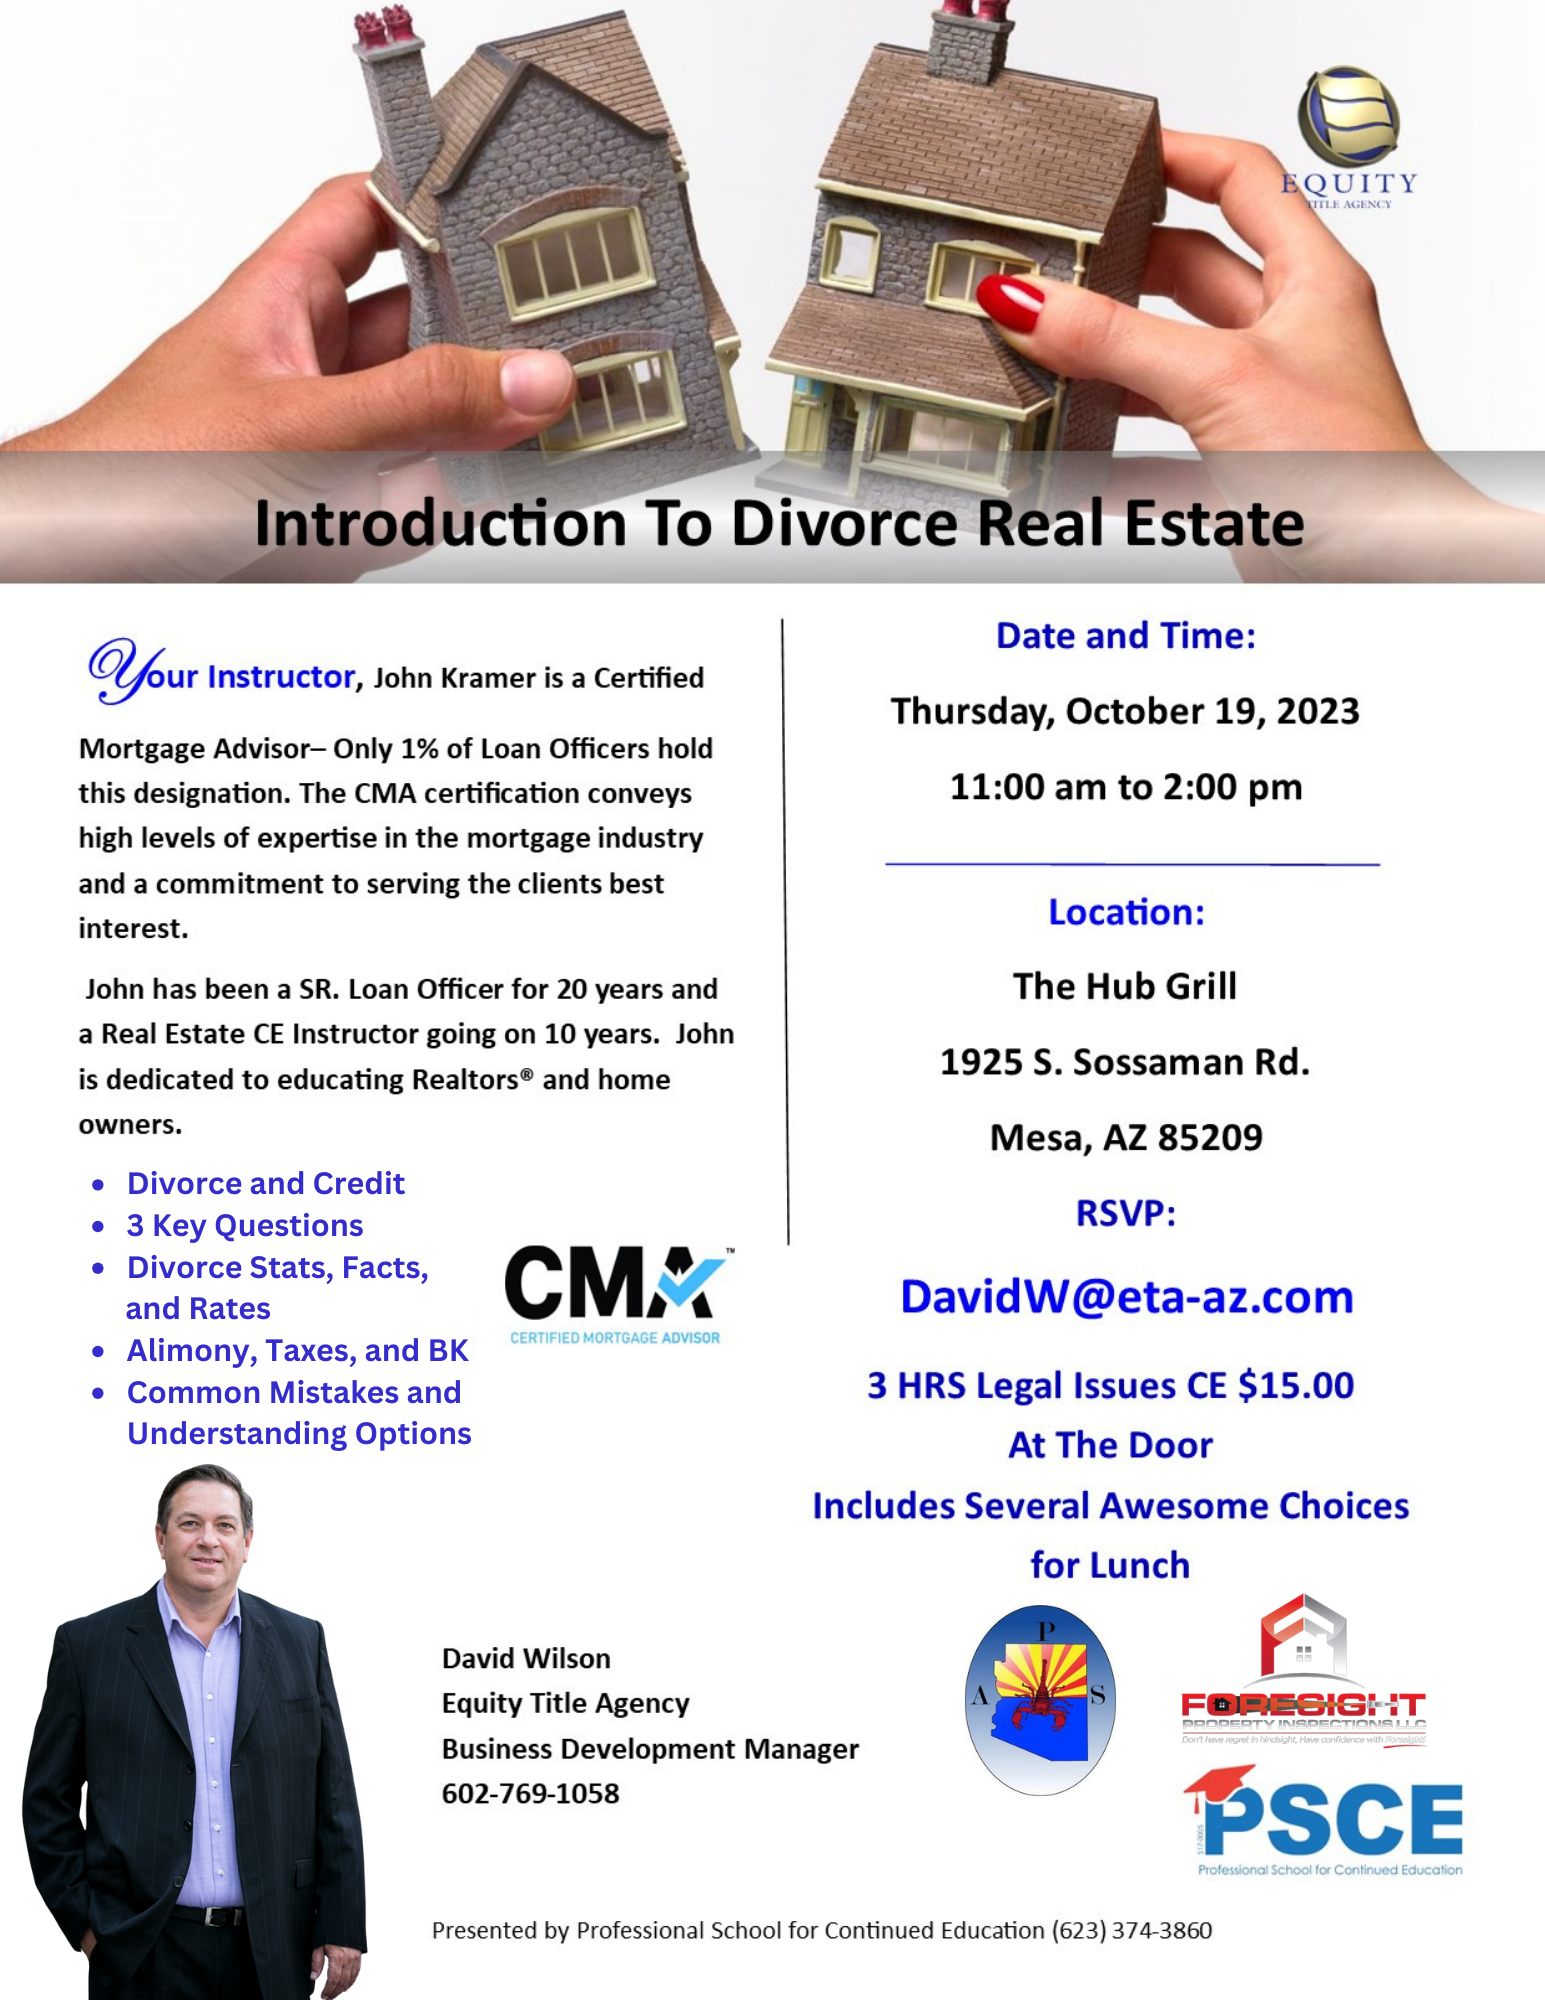 Introduction to Divorce Real Estate